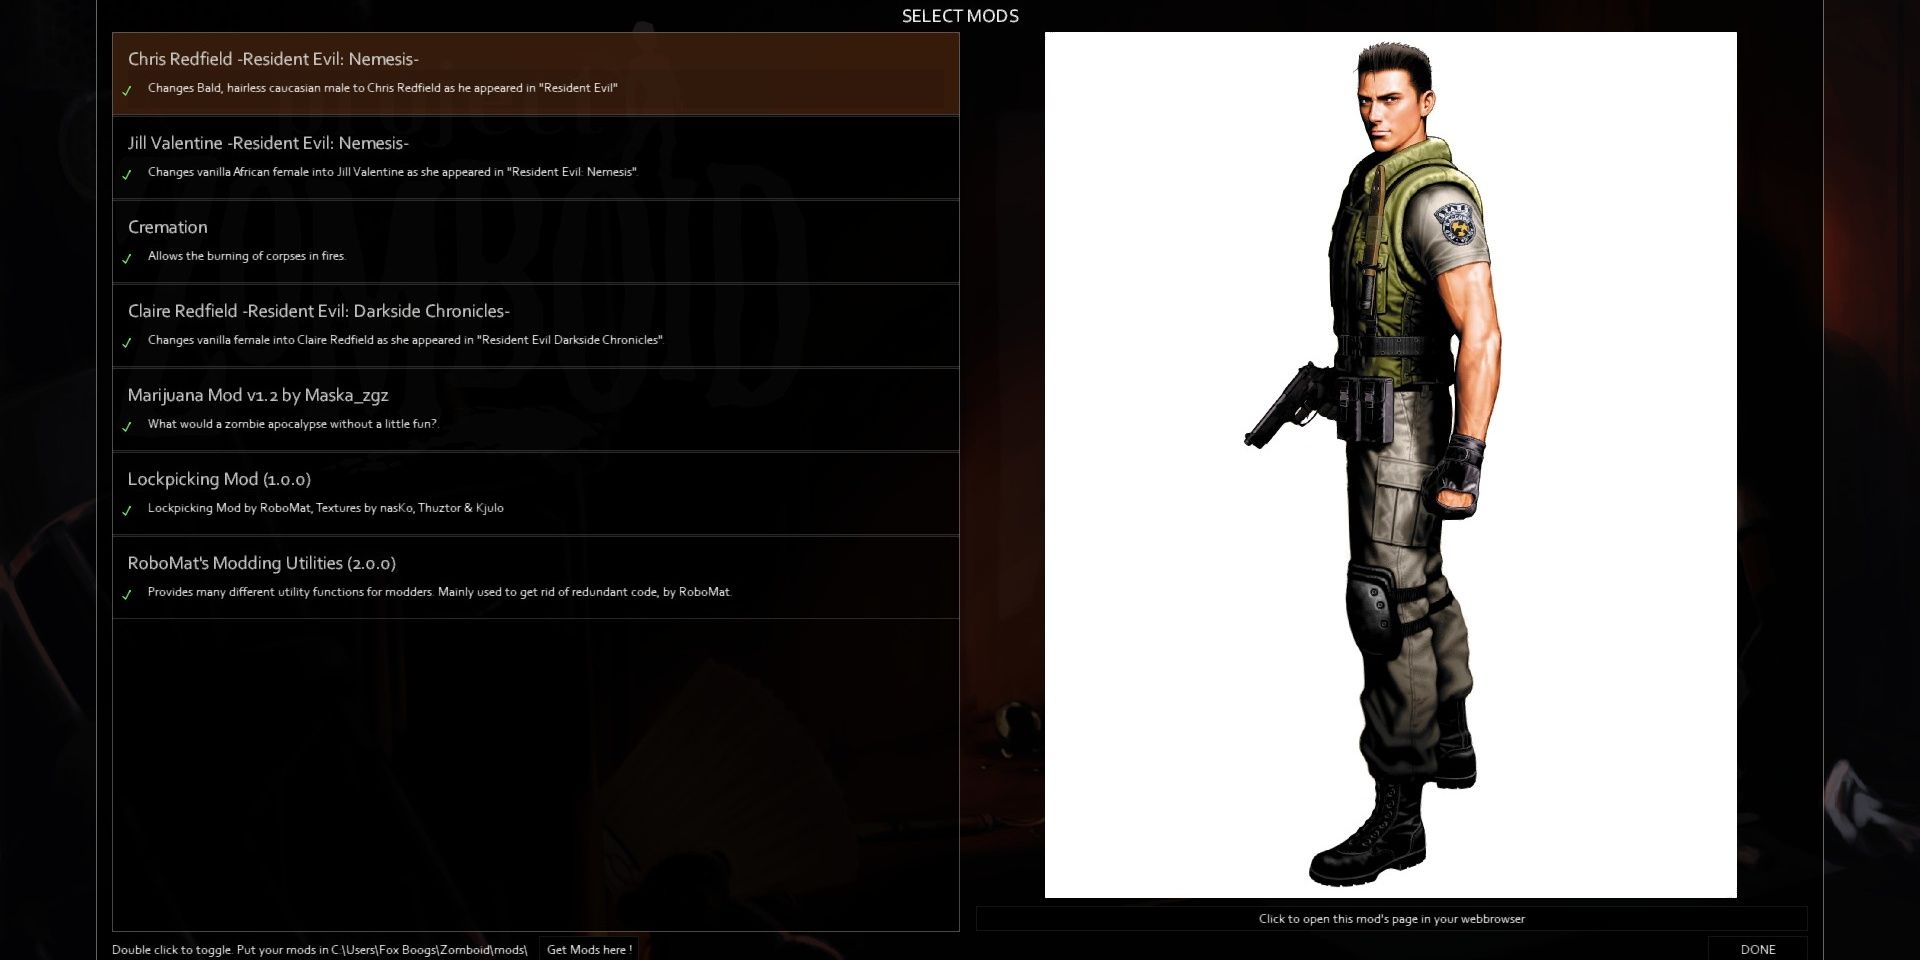 Chris Redfield mod for Project Zomboid